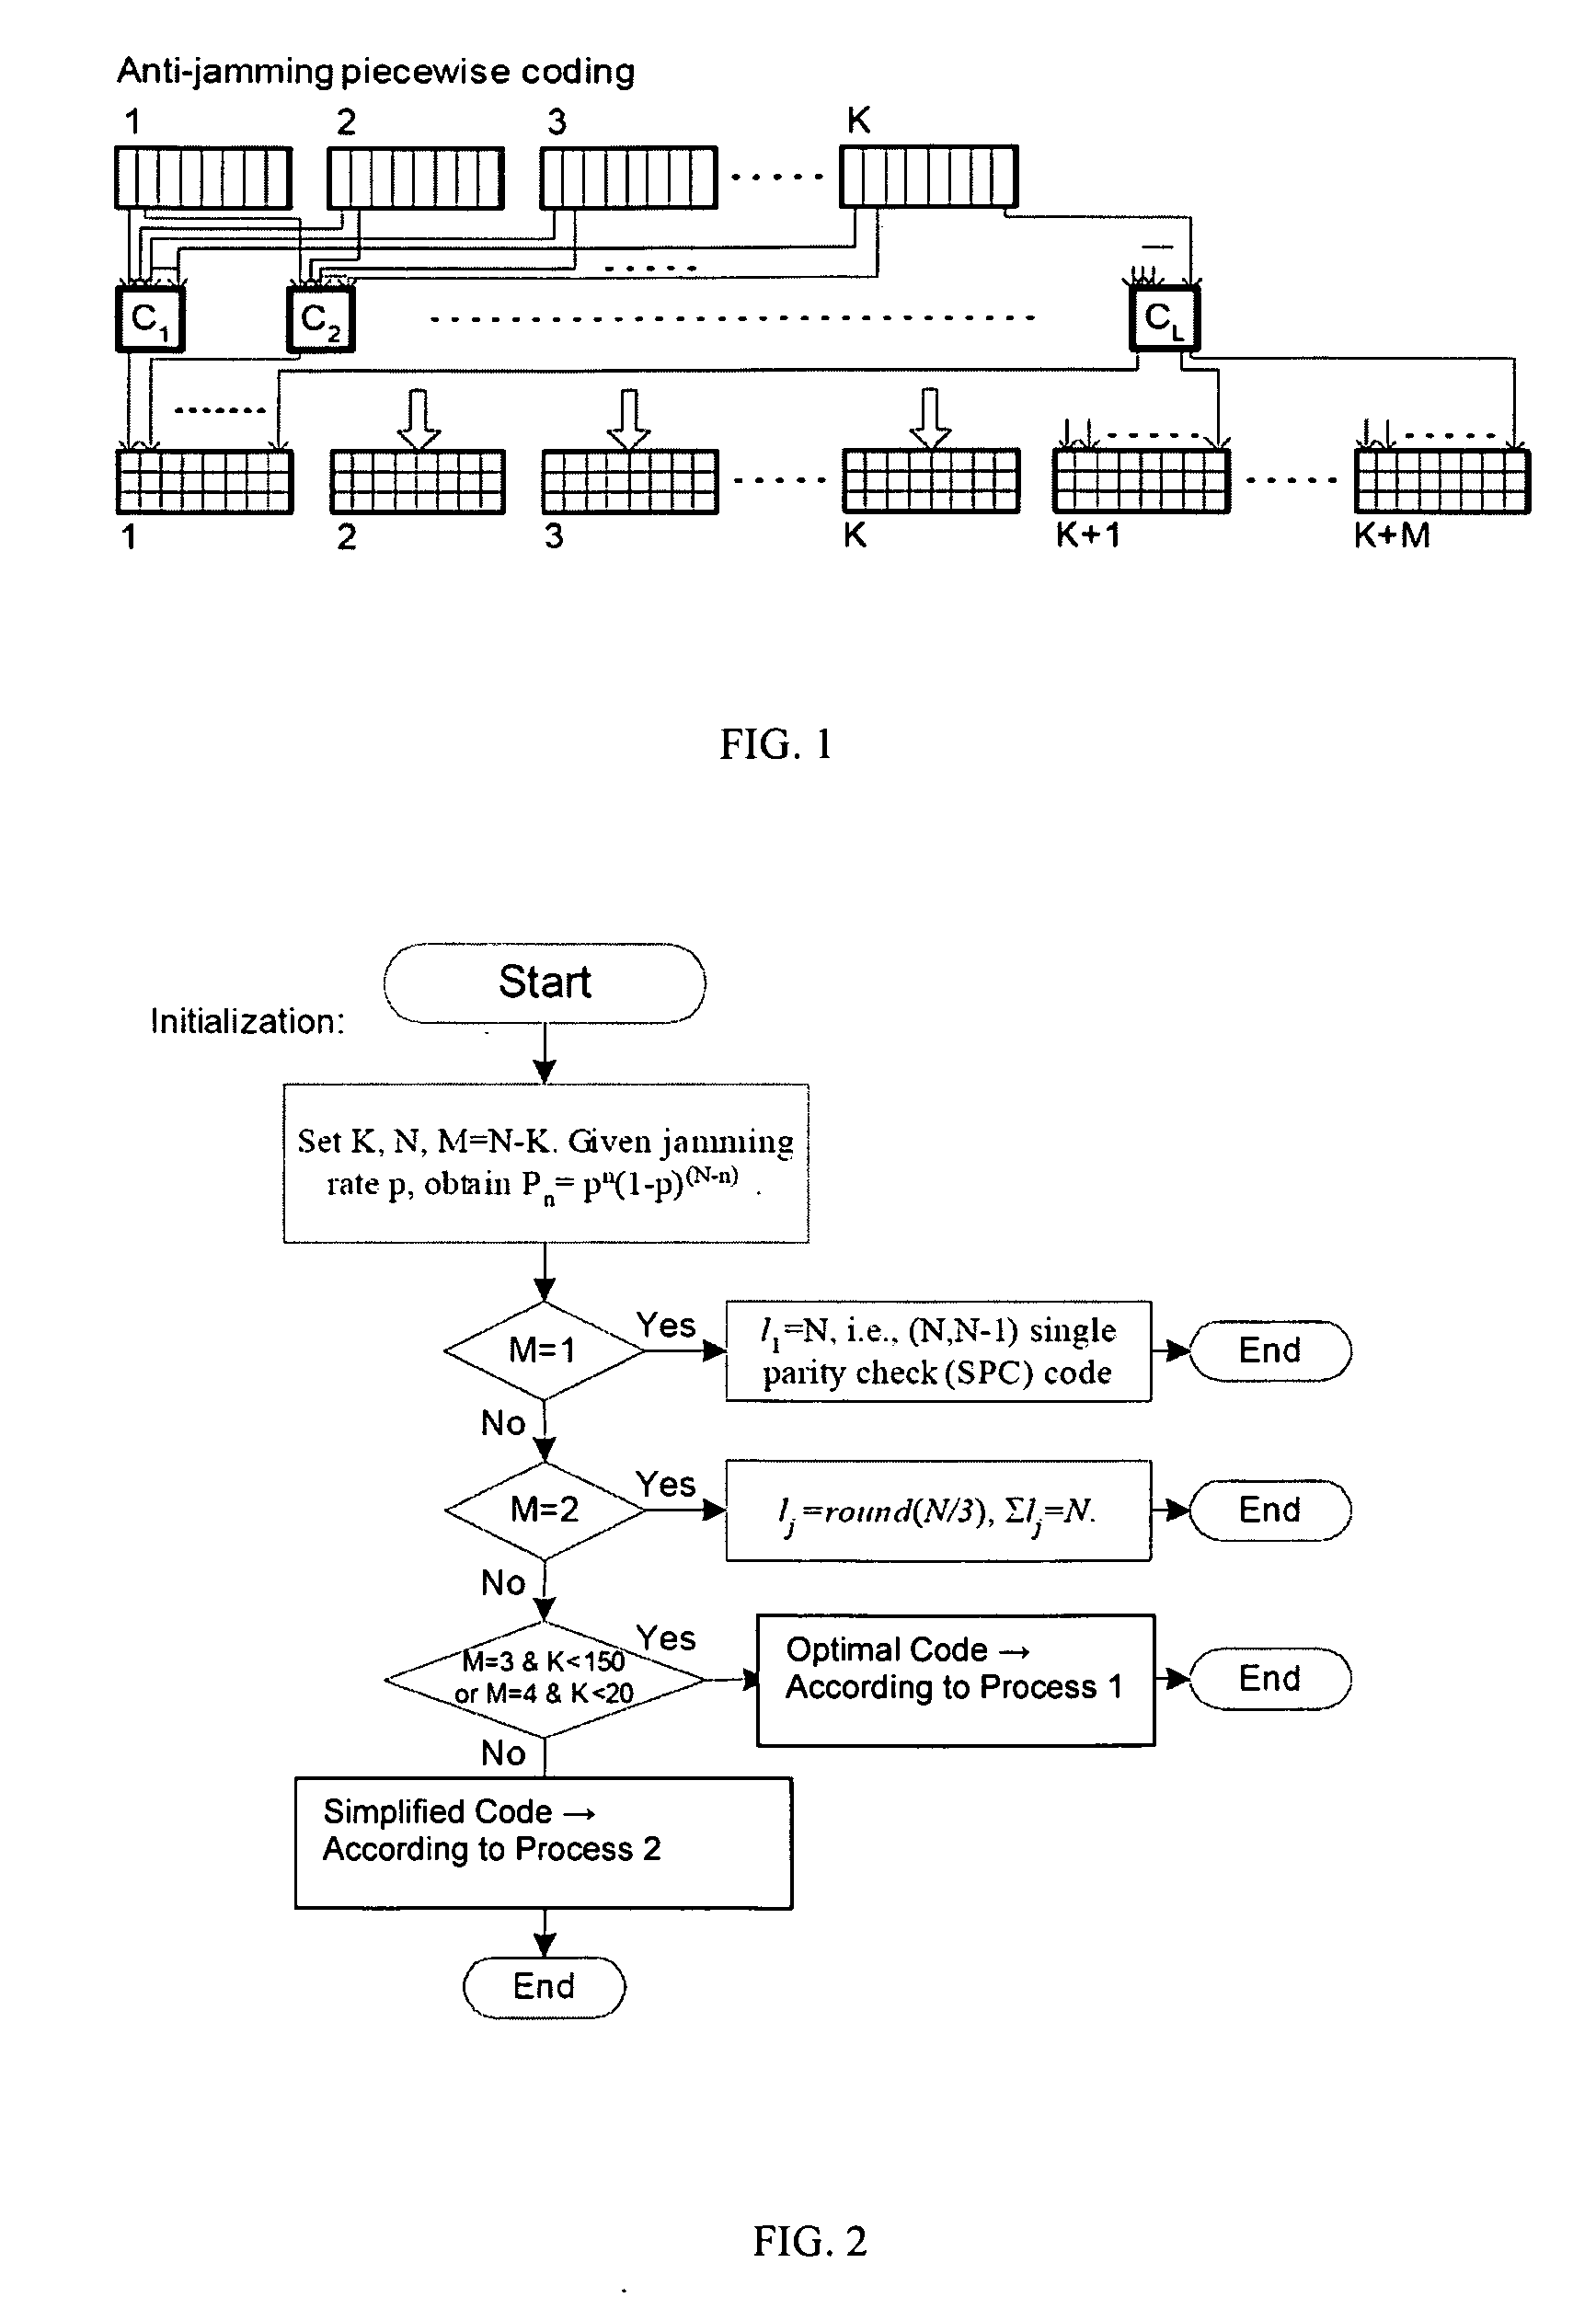 Anti-Jamming Piecewise Coding Method for Parallel Inference Channels